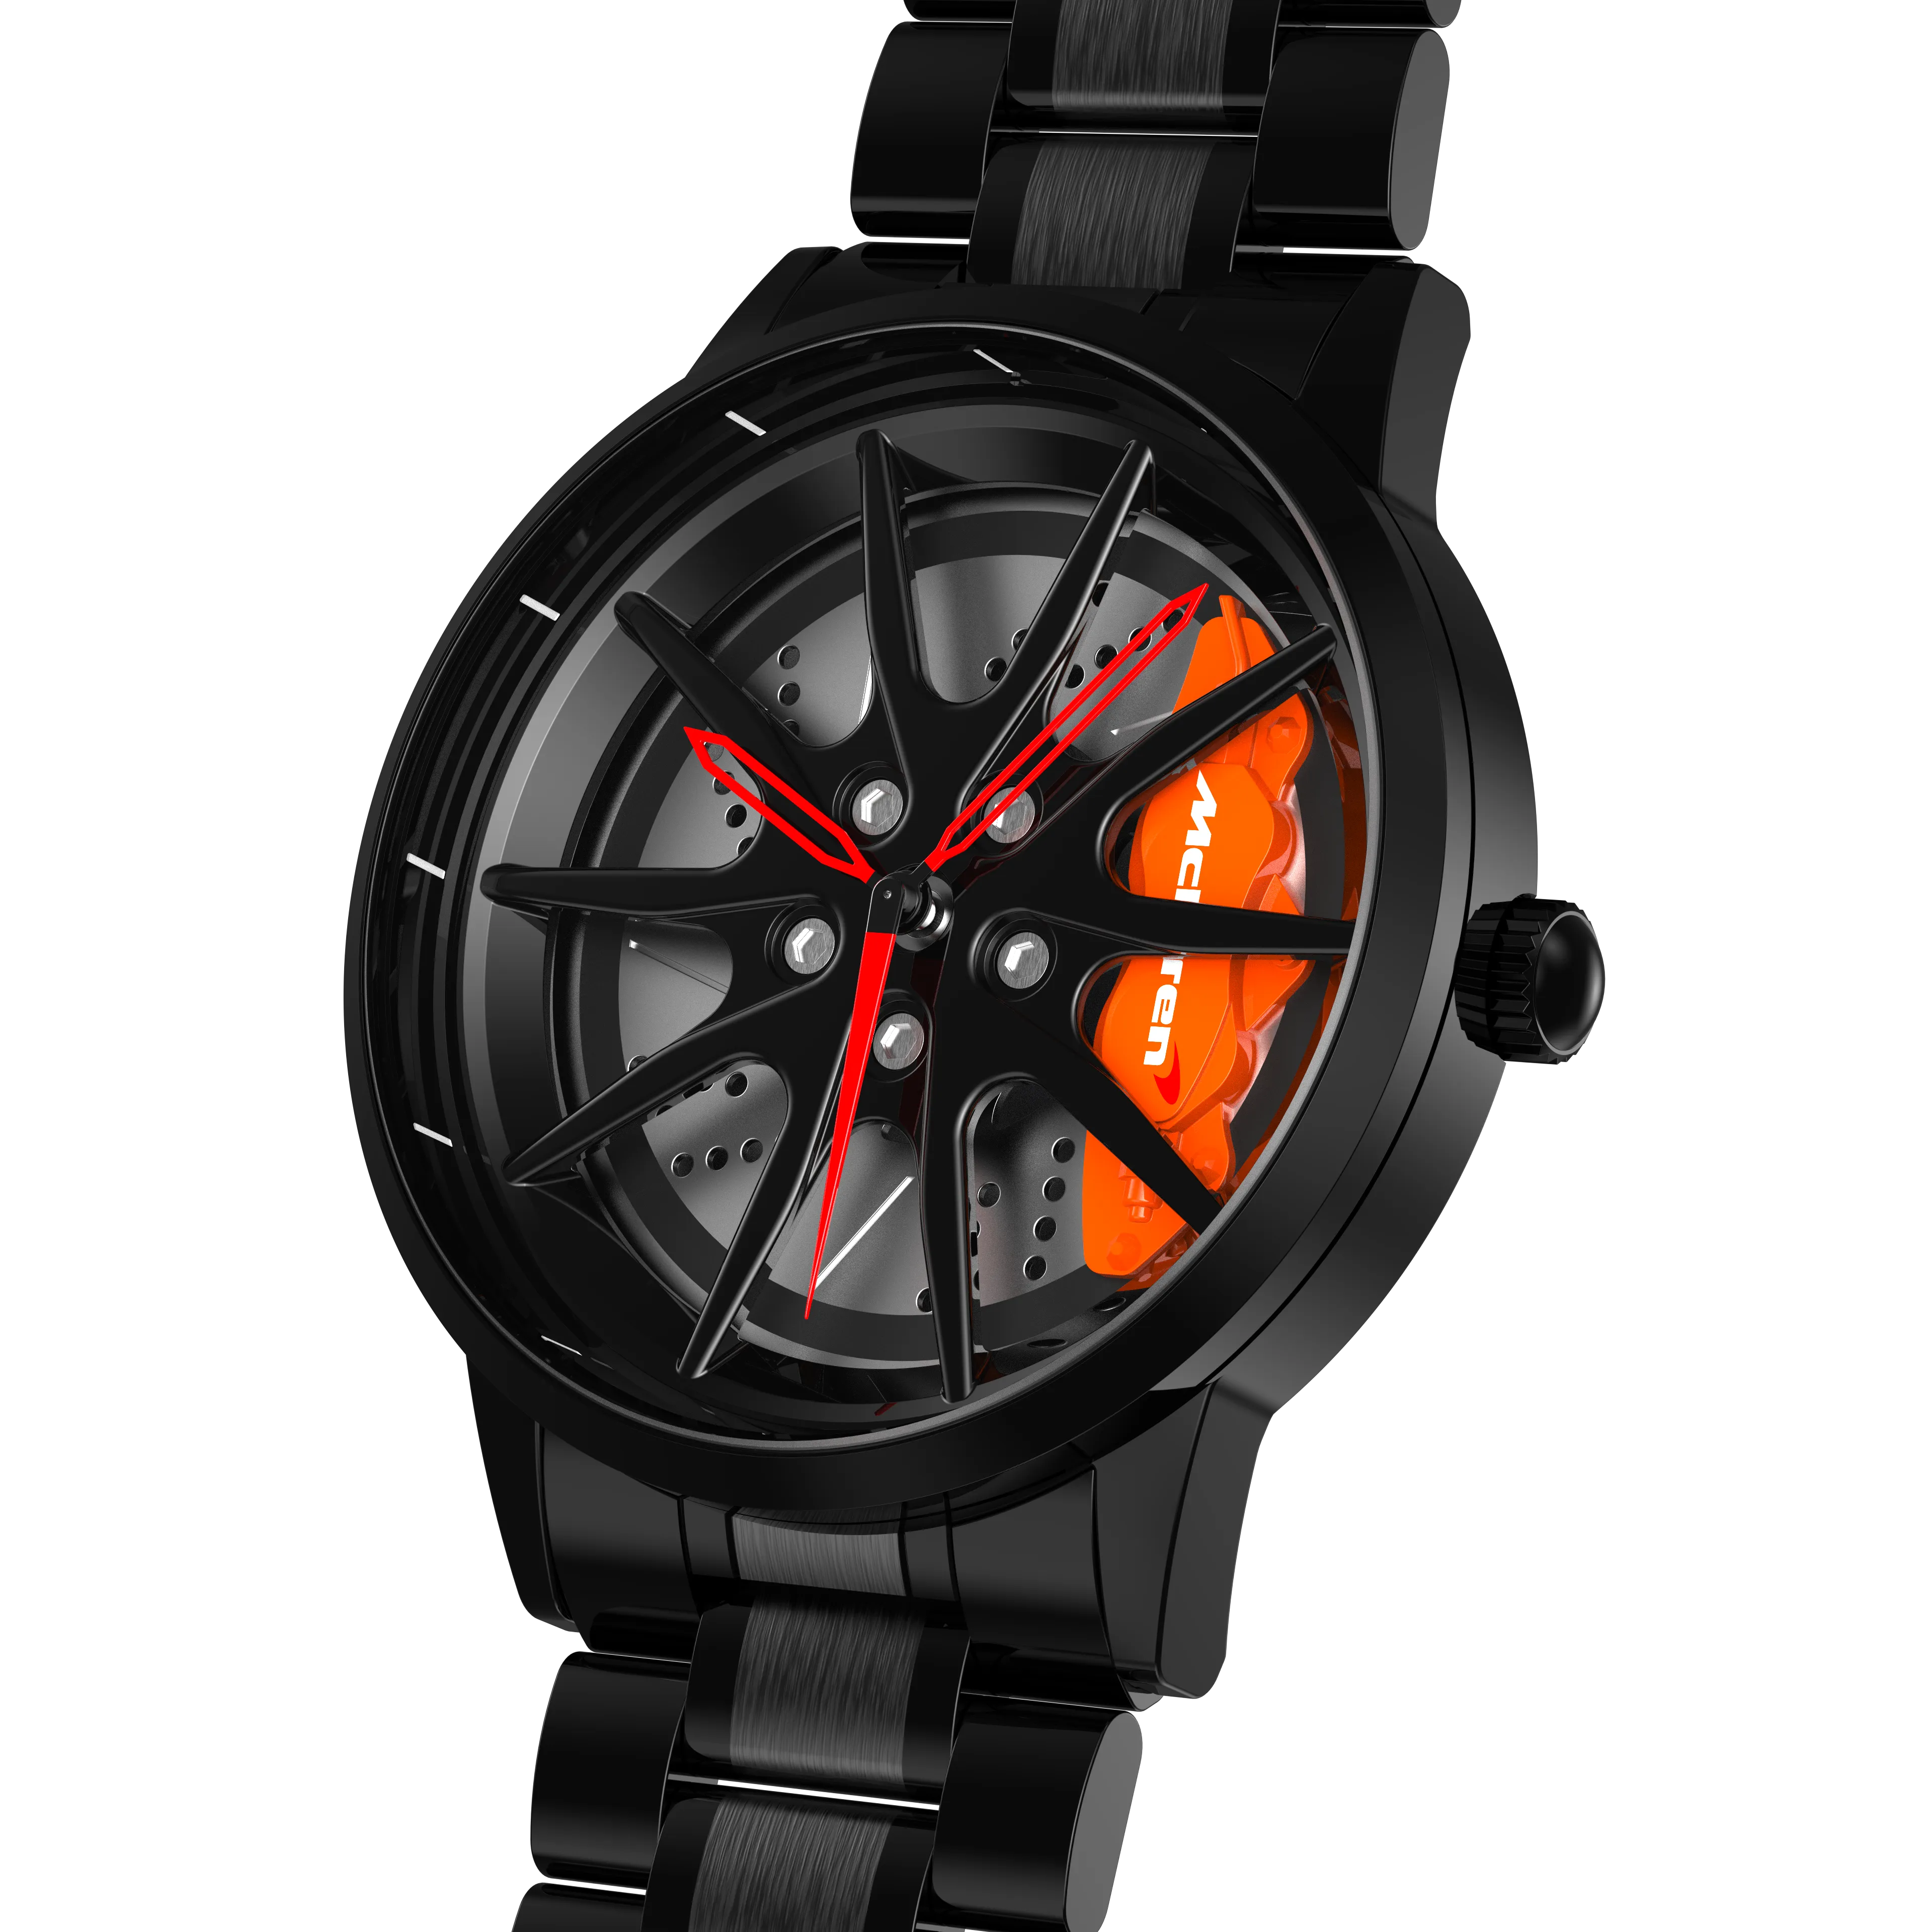 Pilsen Auto Skoda - A stunning VRS watch - just one of the raffle prizes  ready for the Pilsen Skoda's Third Annual RS Day taking place next week  June 30th at 11am!